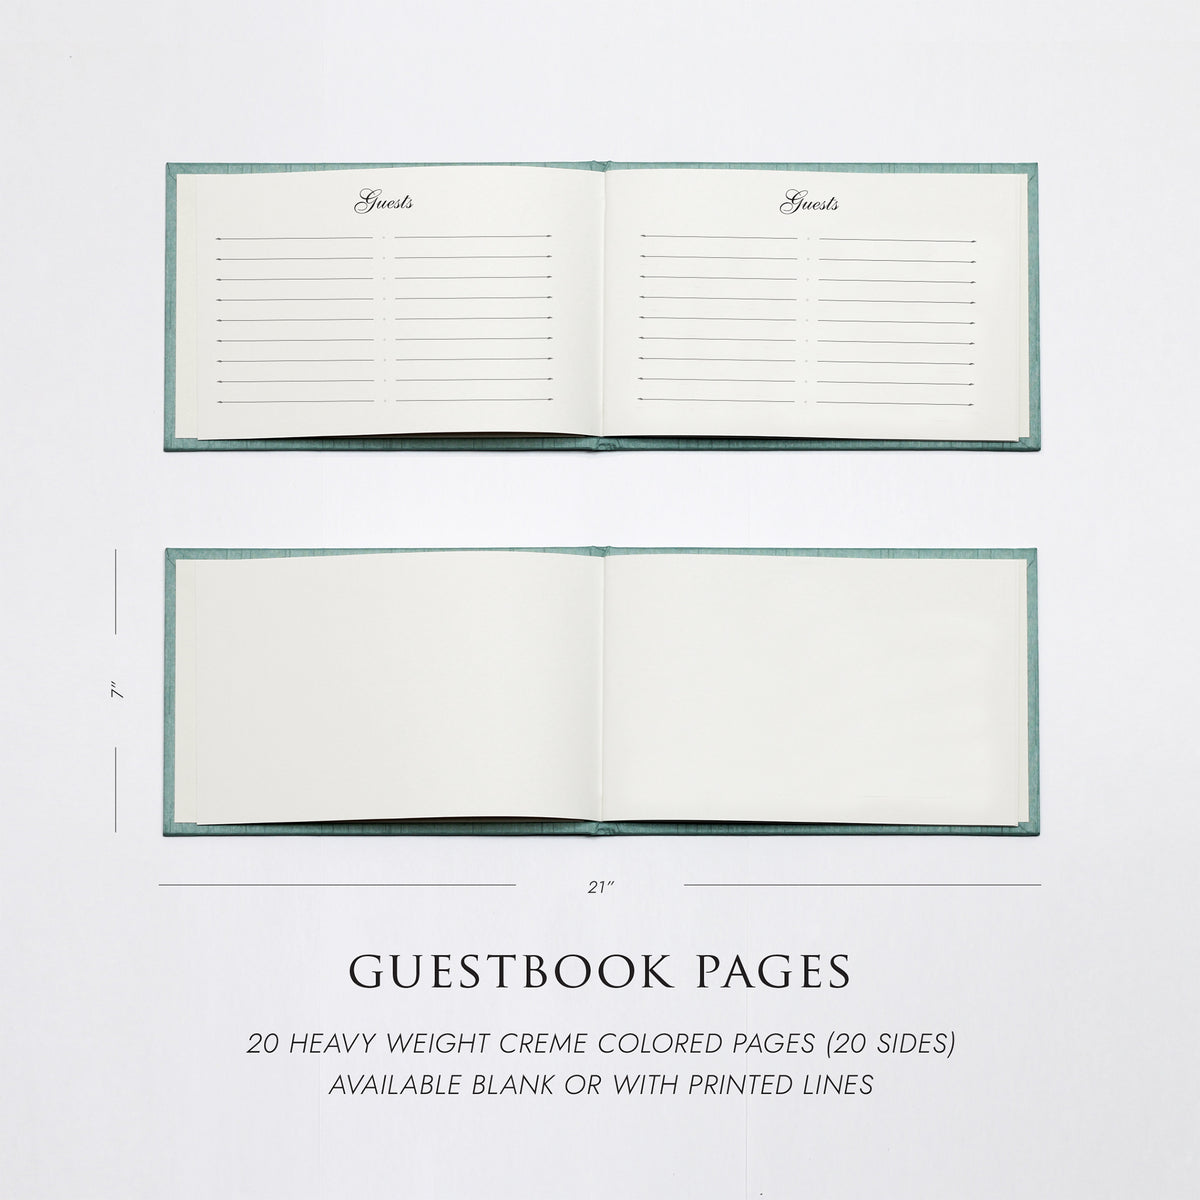 Guestbook Embossed with “Guests” | Cover: Garnet Silk | Available Personalized